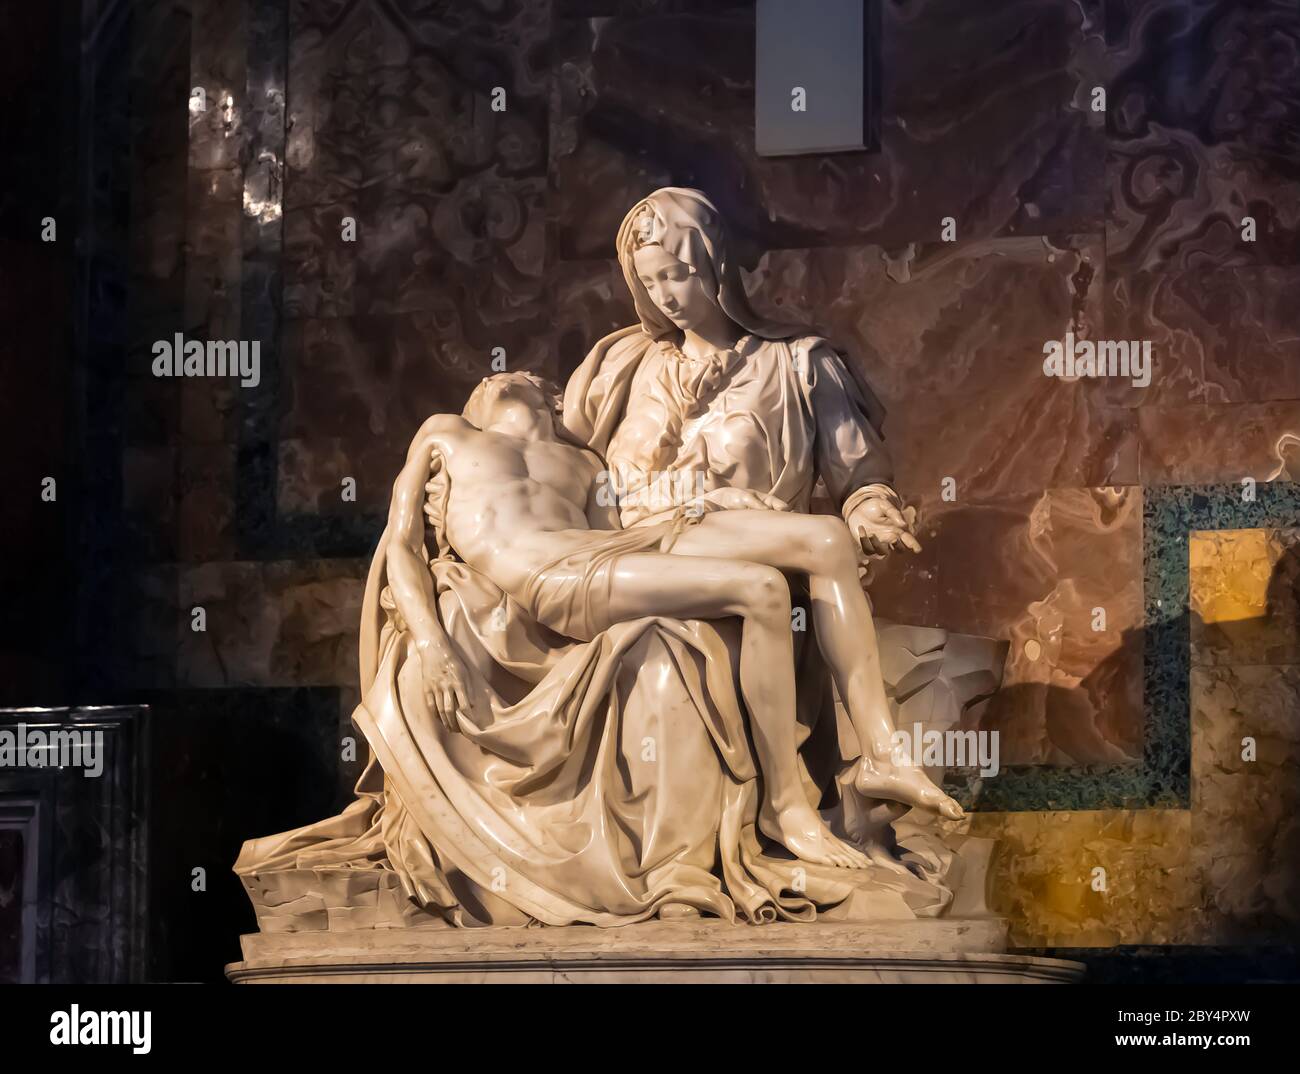 The renaissance statue of the Pietà, completed by Michelangelo in 1499 and housed in St Peter's Basilica in Vatican City. Stock Photo